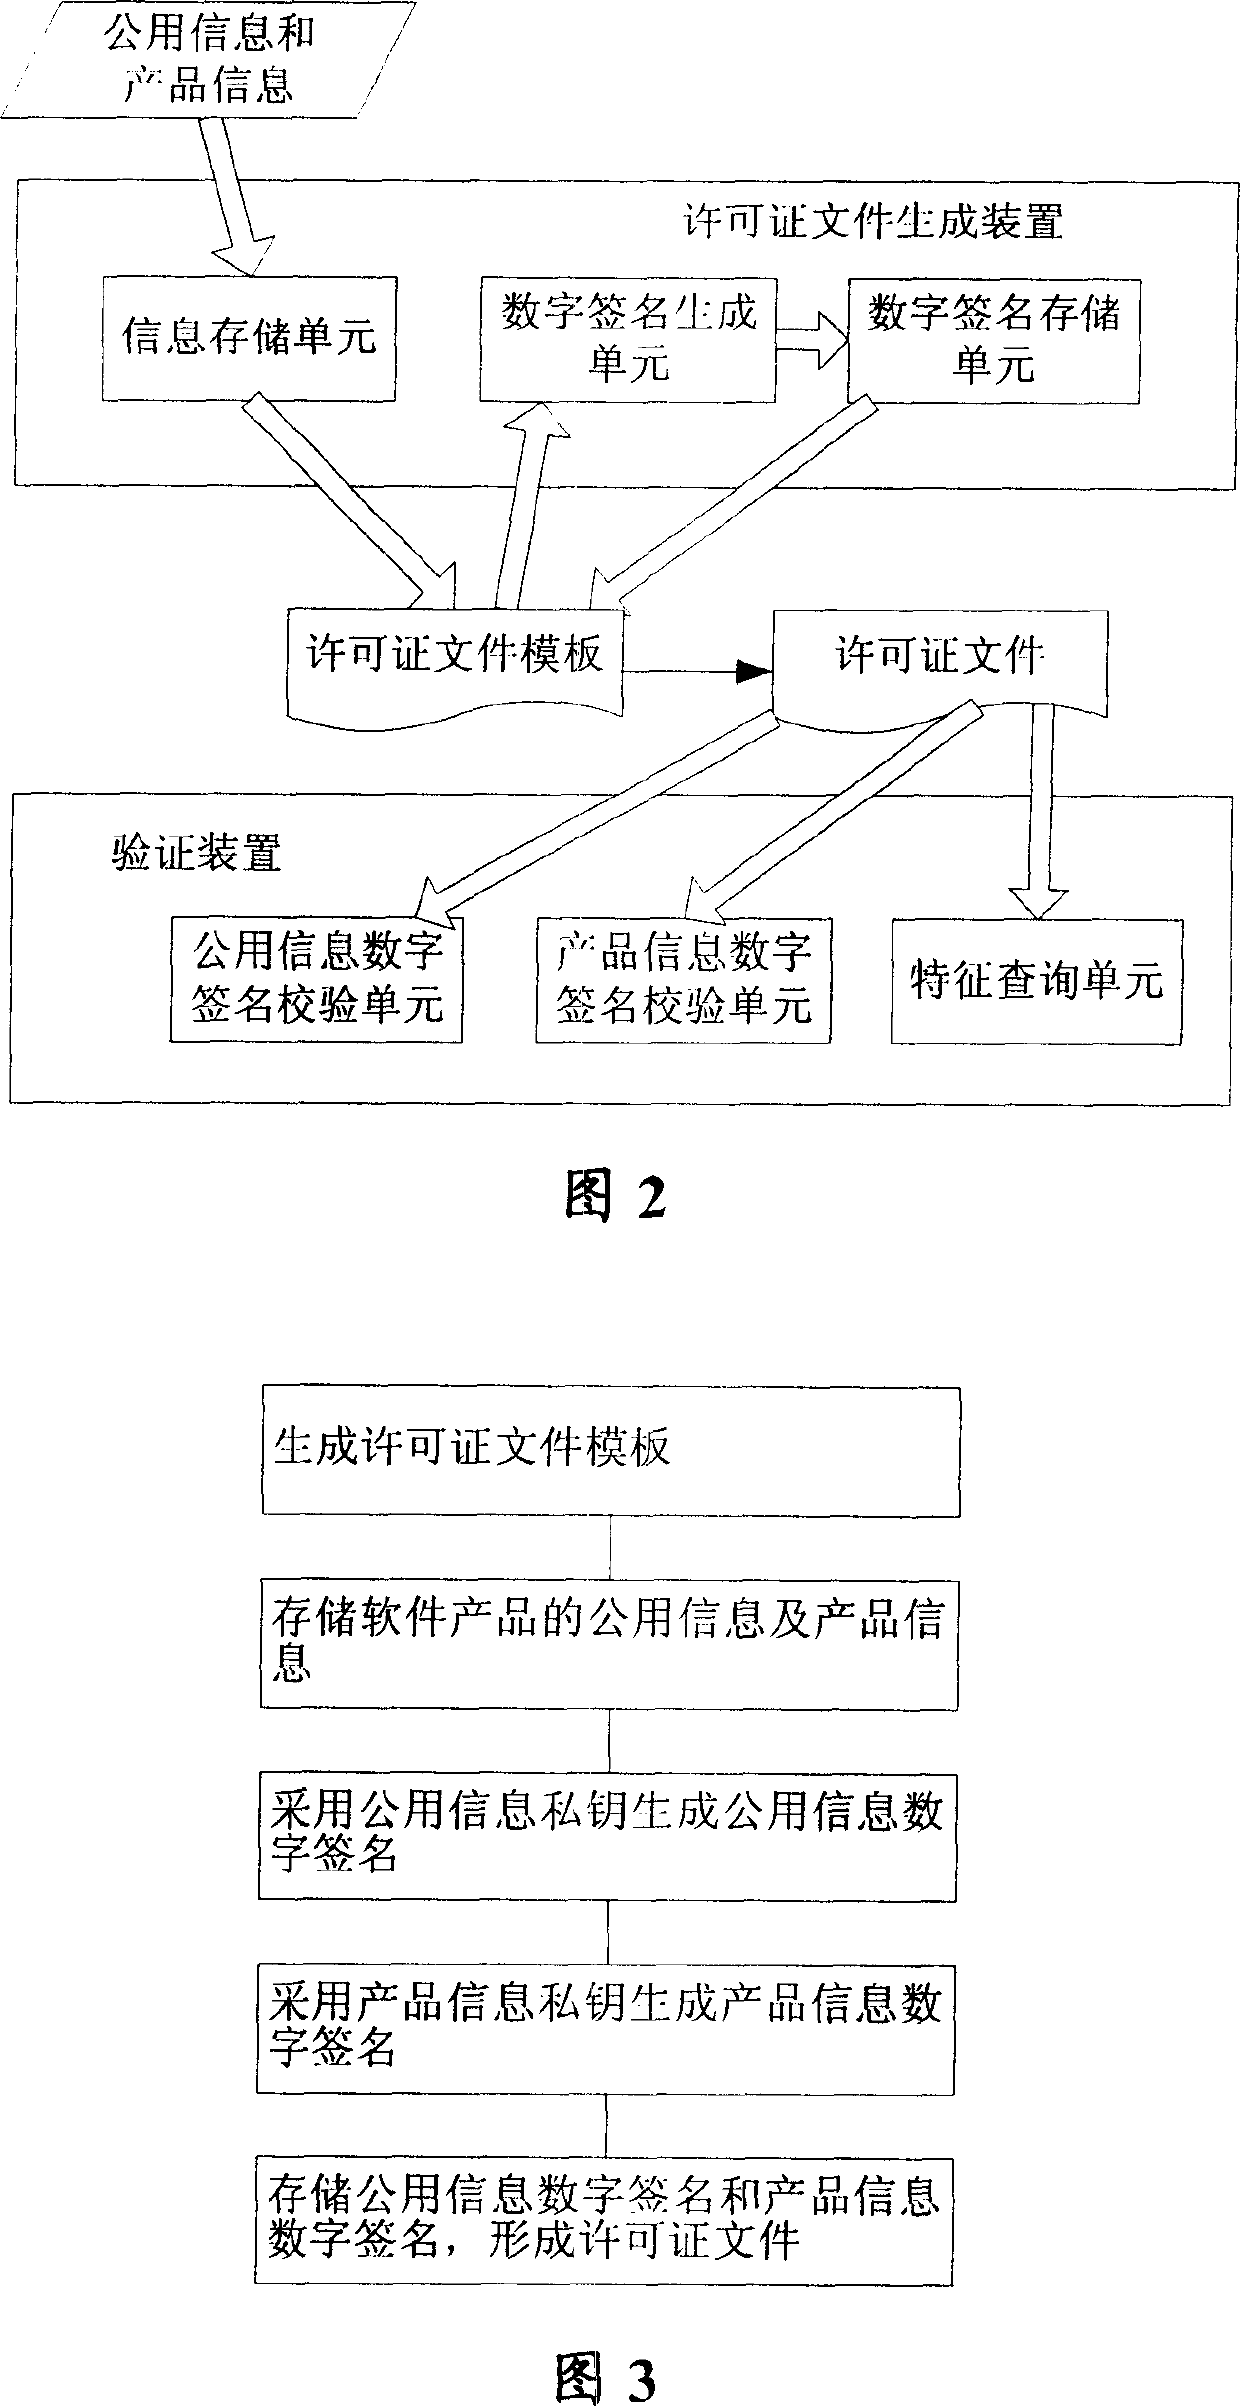 Licensing file generating method, software product protection method and system